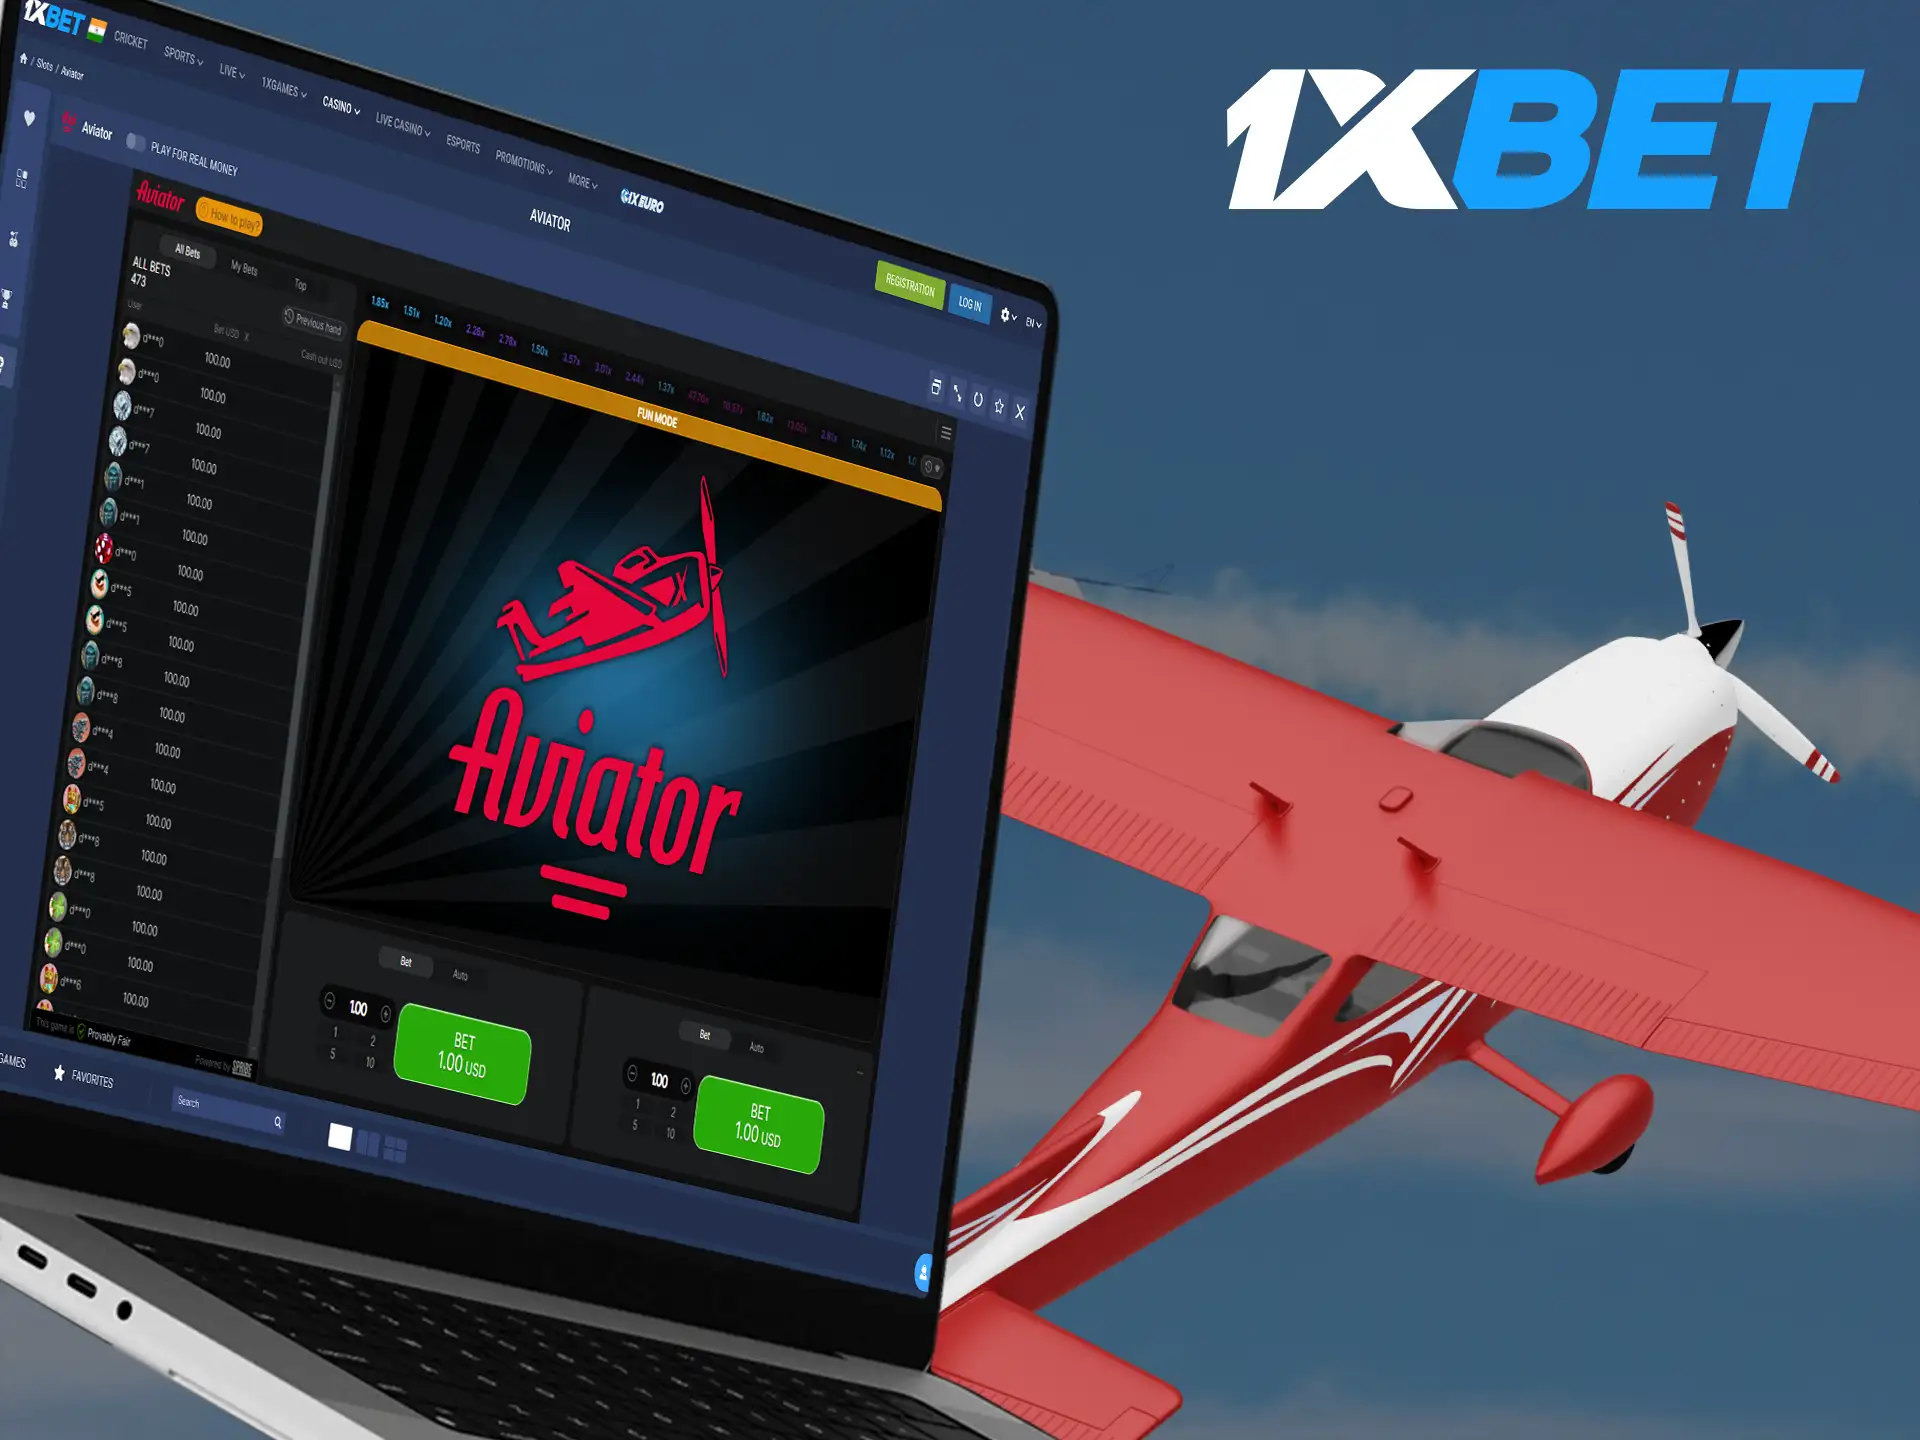 1xBet offers Aviator, an exciting online game combining elements of luck and strategy.